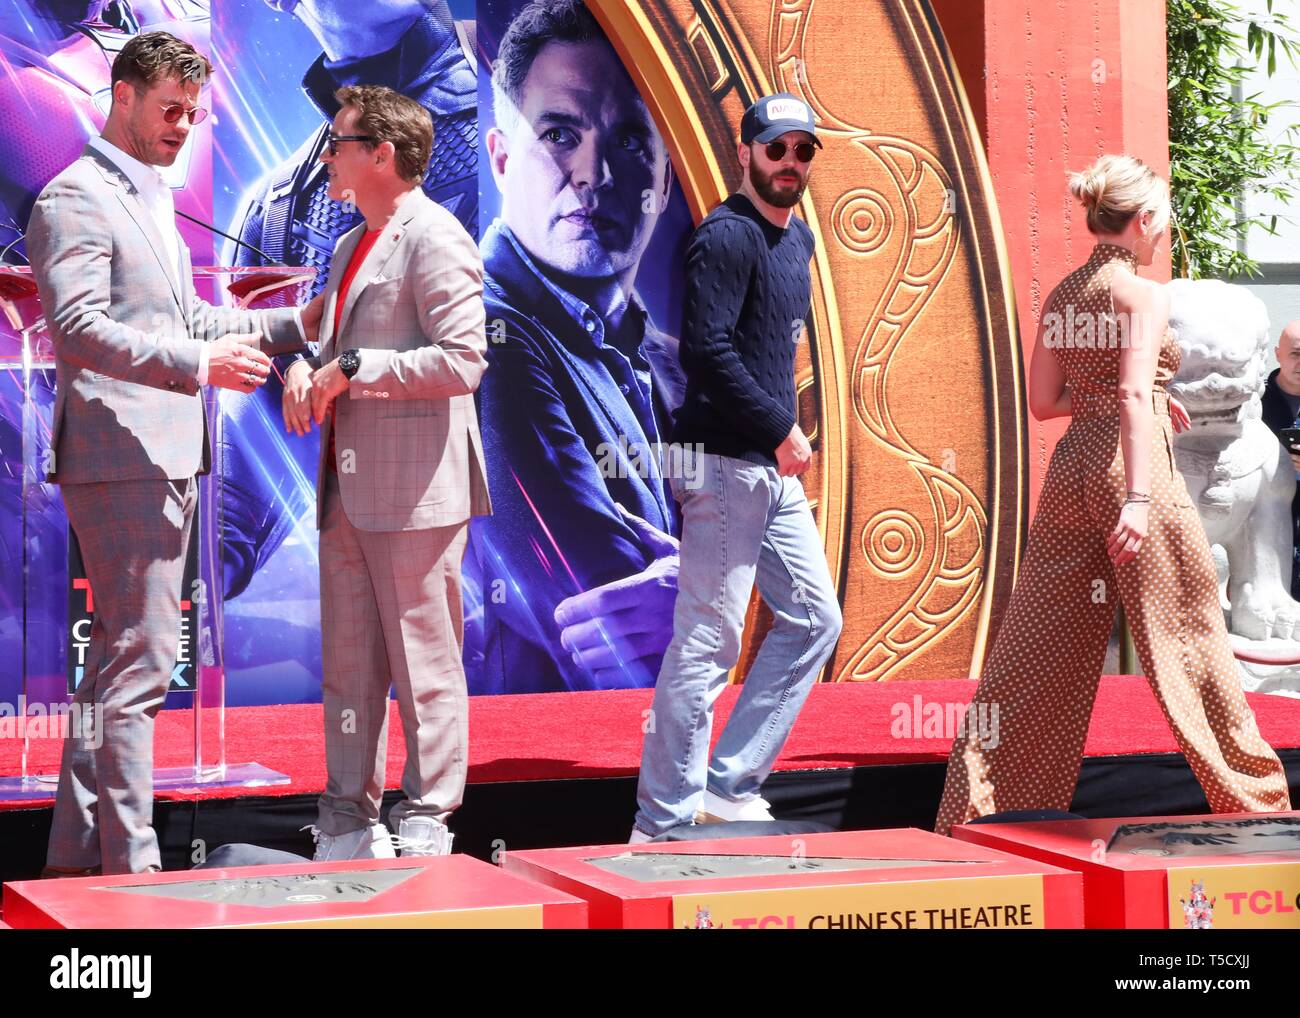 Hollywood, United States. 23rd Apr, 2019. HOLLYWOOD, LOS ANGELES, CALIFORNIA, USA - APRIL 23: Chris Hemsworth, Chris Evans, Robert Downey Jr., Scarlett Johansson attend the Marvel Studios' 'Avengers: Endgame' Cast Place Their Hand Prints In Cement At TCL Chinese Theatre IMAX Forecourt held at the TCL Chinese Theatre IMAX on April 23, 2019 in Hollywood, Los Angeles, California, United States. (Photo by David Acosta/Image Press Agency) Credit: Image Press Agency/Alamy Live News Stock Photo